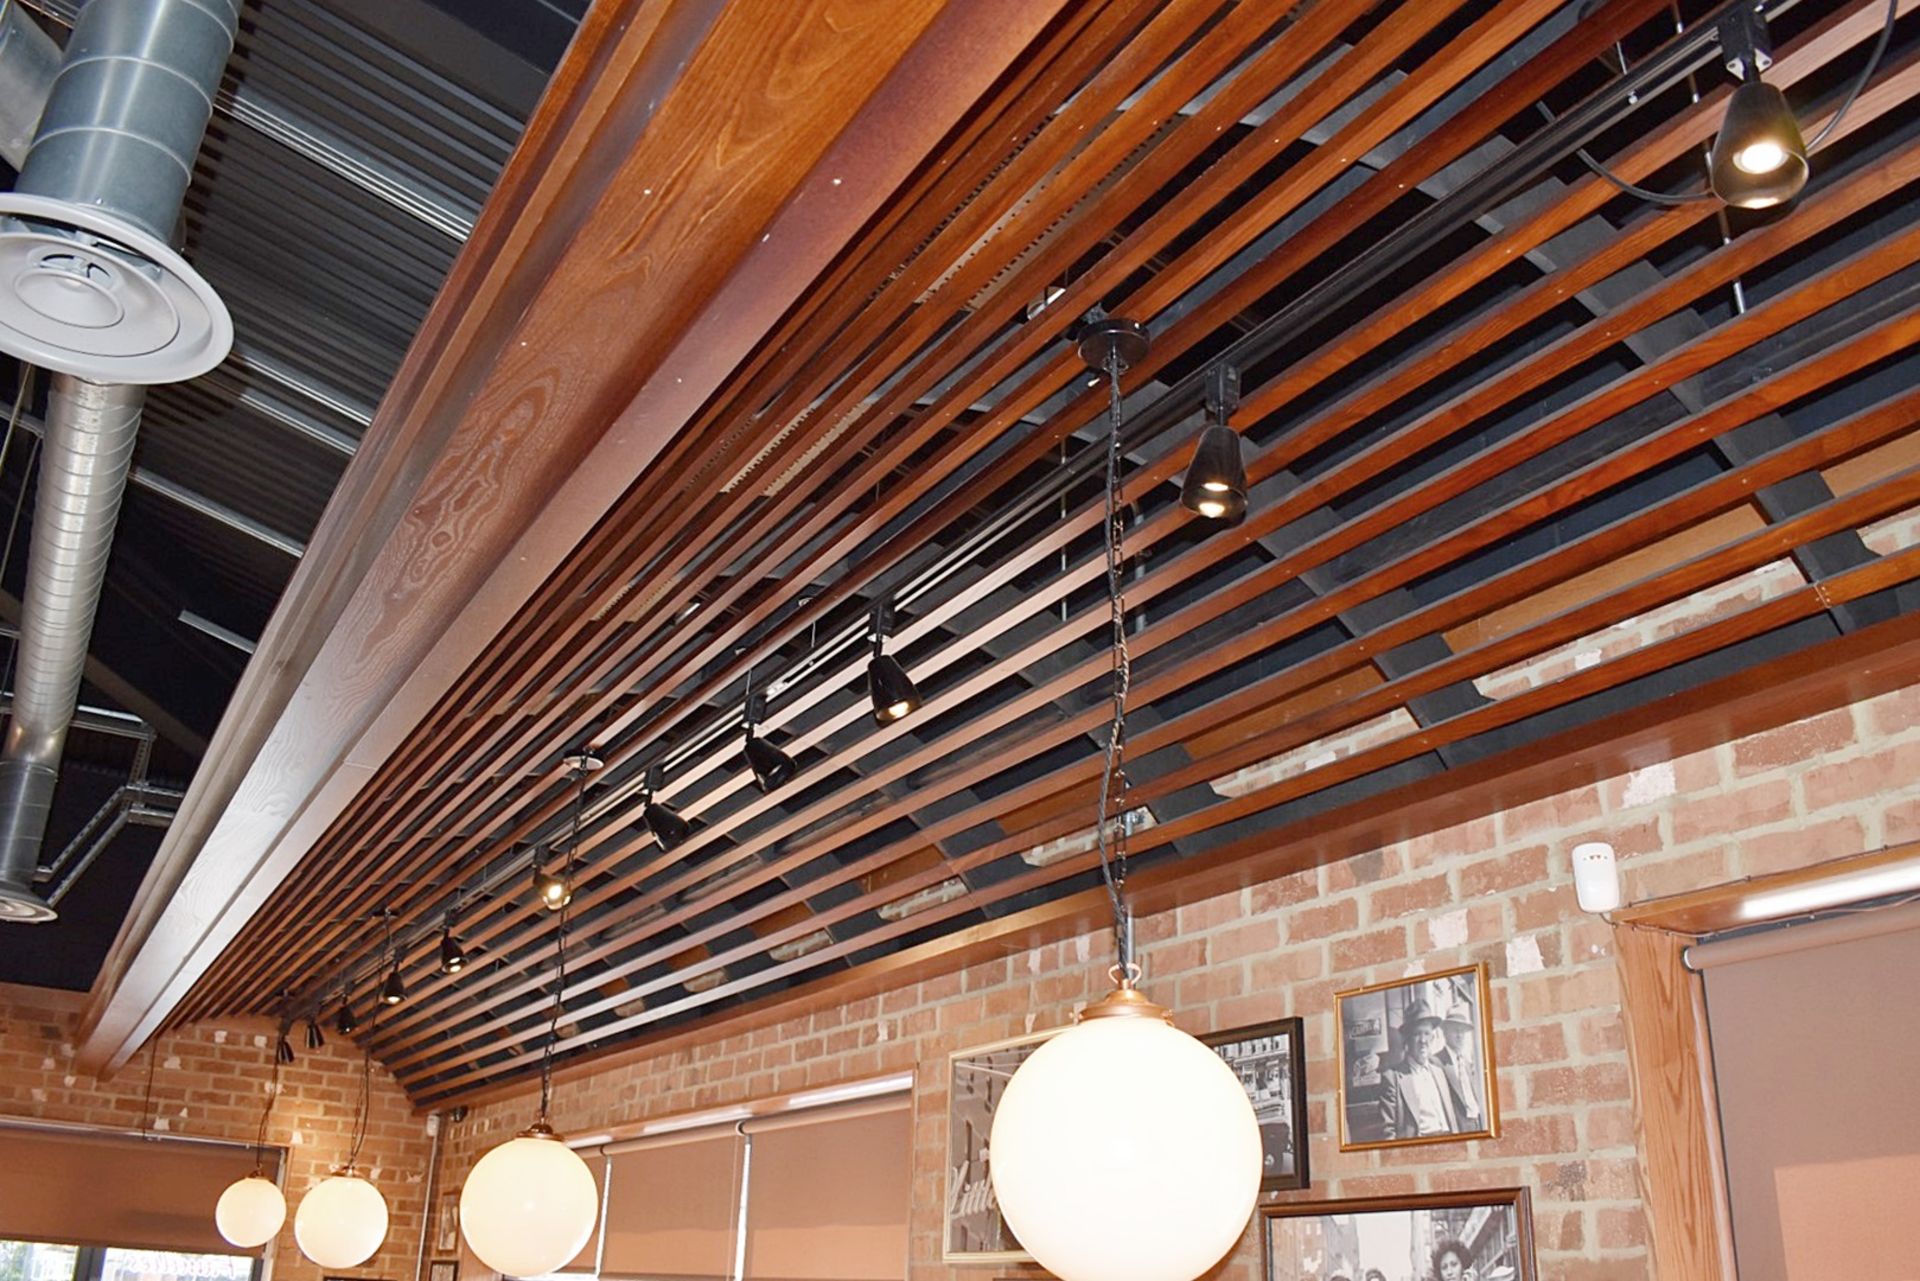 1 x Large Suspended U Shaped Bespoke Slat Ceiling Feature - Approx 30ft in Length - Can Be - Image 2 of 9